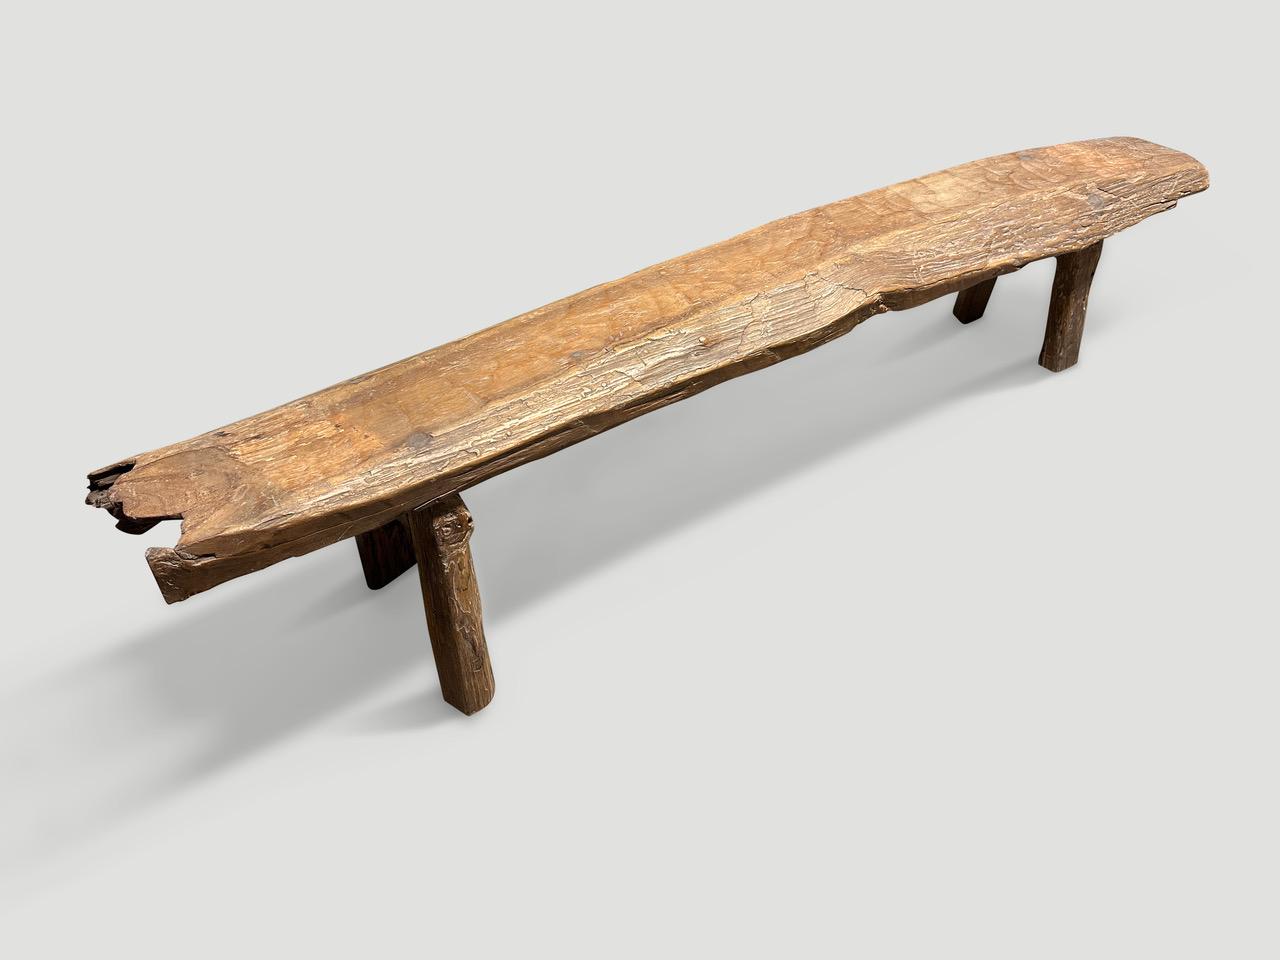 Impressive antique bench with beautiful character and patina, hand made from a single thick teak log. Circa 1950.

This bench was hand made in the spirit of Wabi-Sabi, a Japanese philosophy that beauty can be found in imperfection and impermanence.